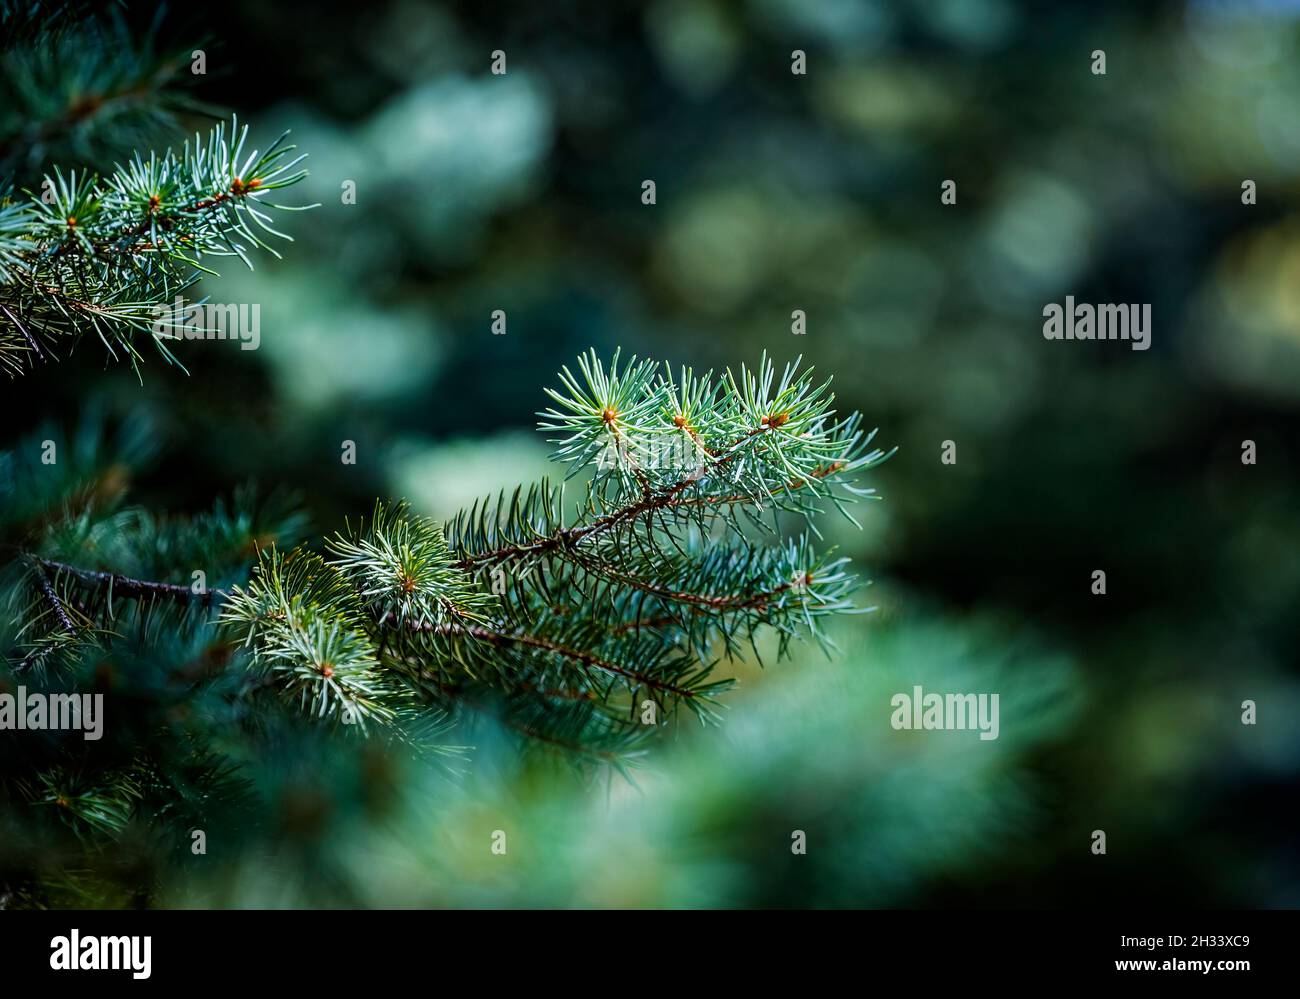 Green blue prickly branches of a evergreen fir tree. Blue spruce, green spruce or Colorado spruce. Christmas background. Stock Photo